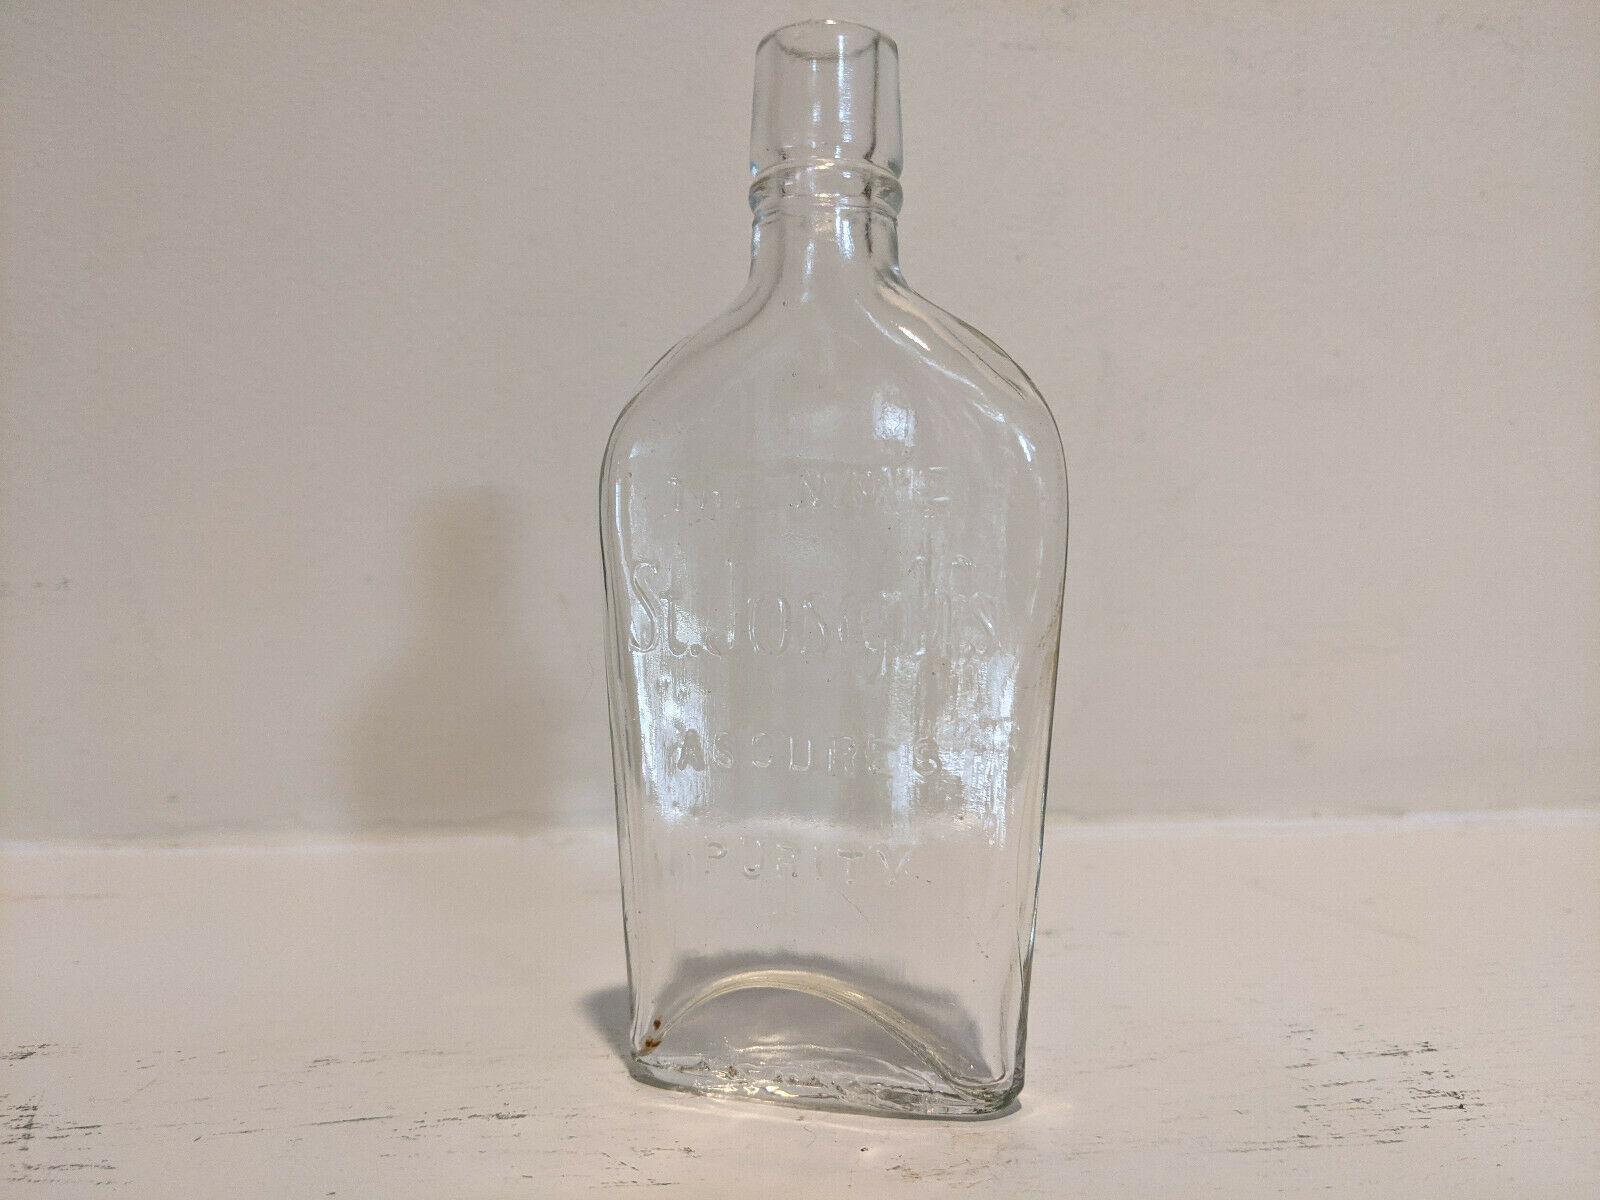 Primary image for Early 1900s St Joseph's Medicine Bottle  Assures Purity Vintage Apothecary Jar